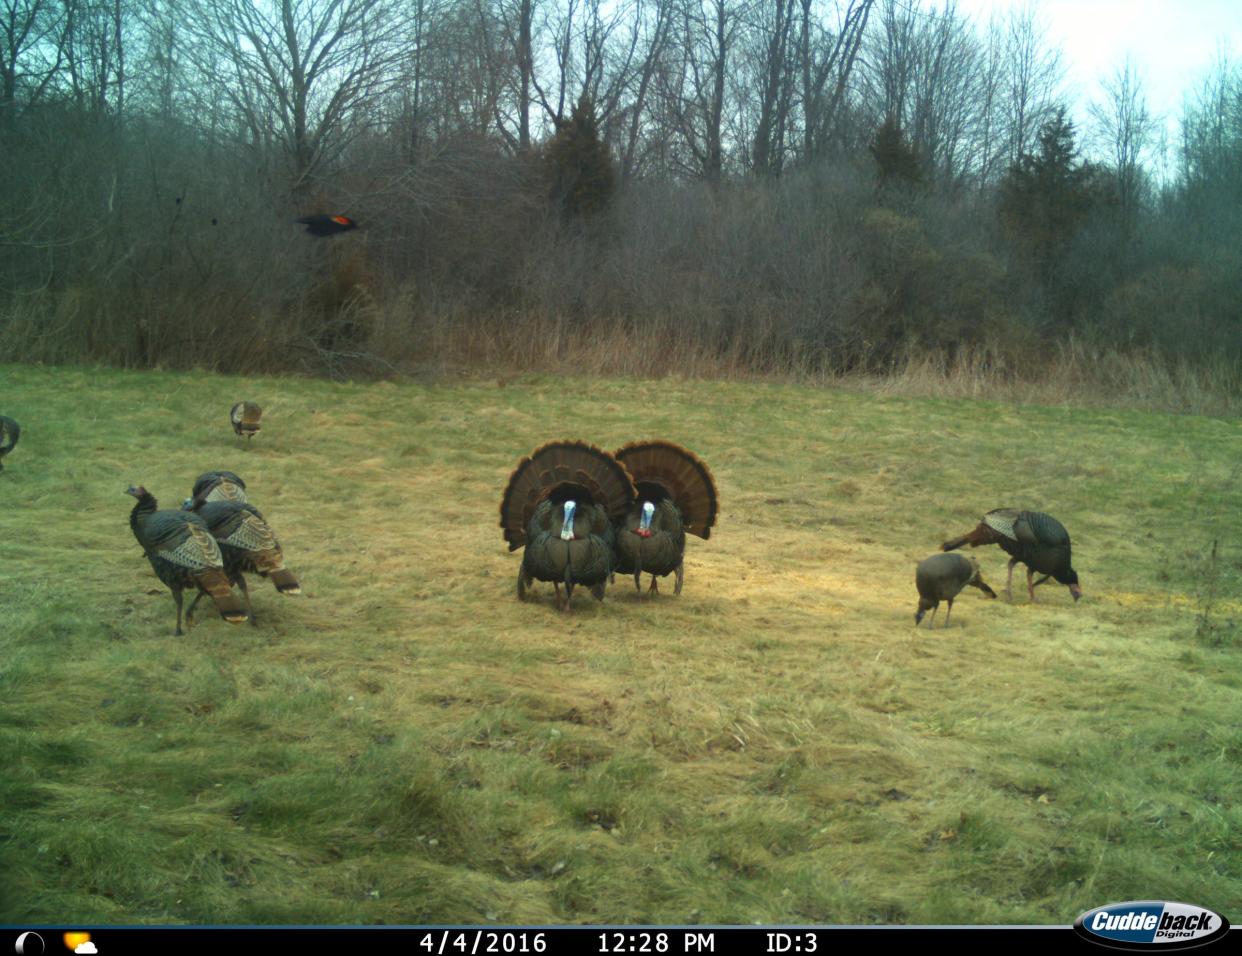 Wild turkeys were captured on a trail camera at the GM Milford Proving Grounds n Milford on April 4, 2016.